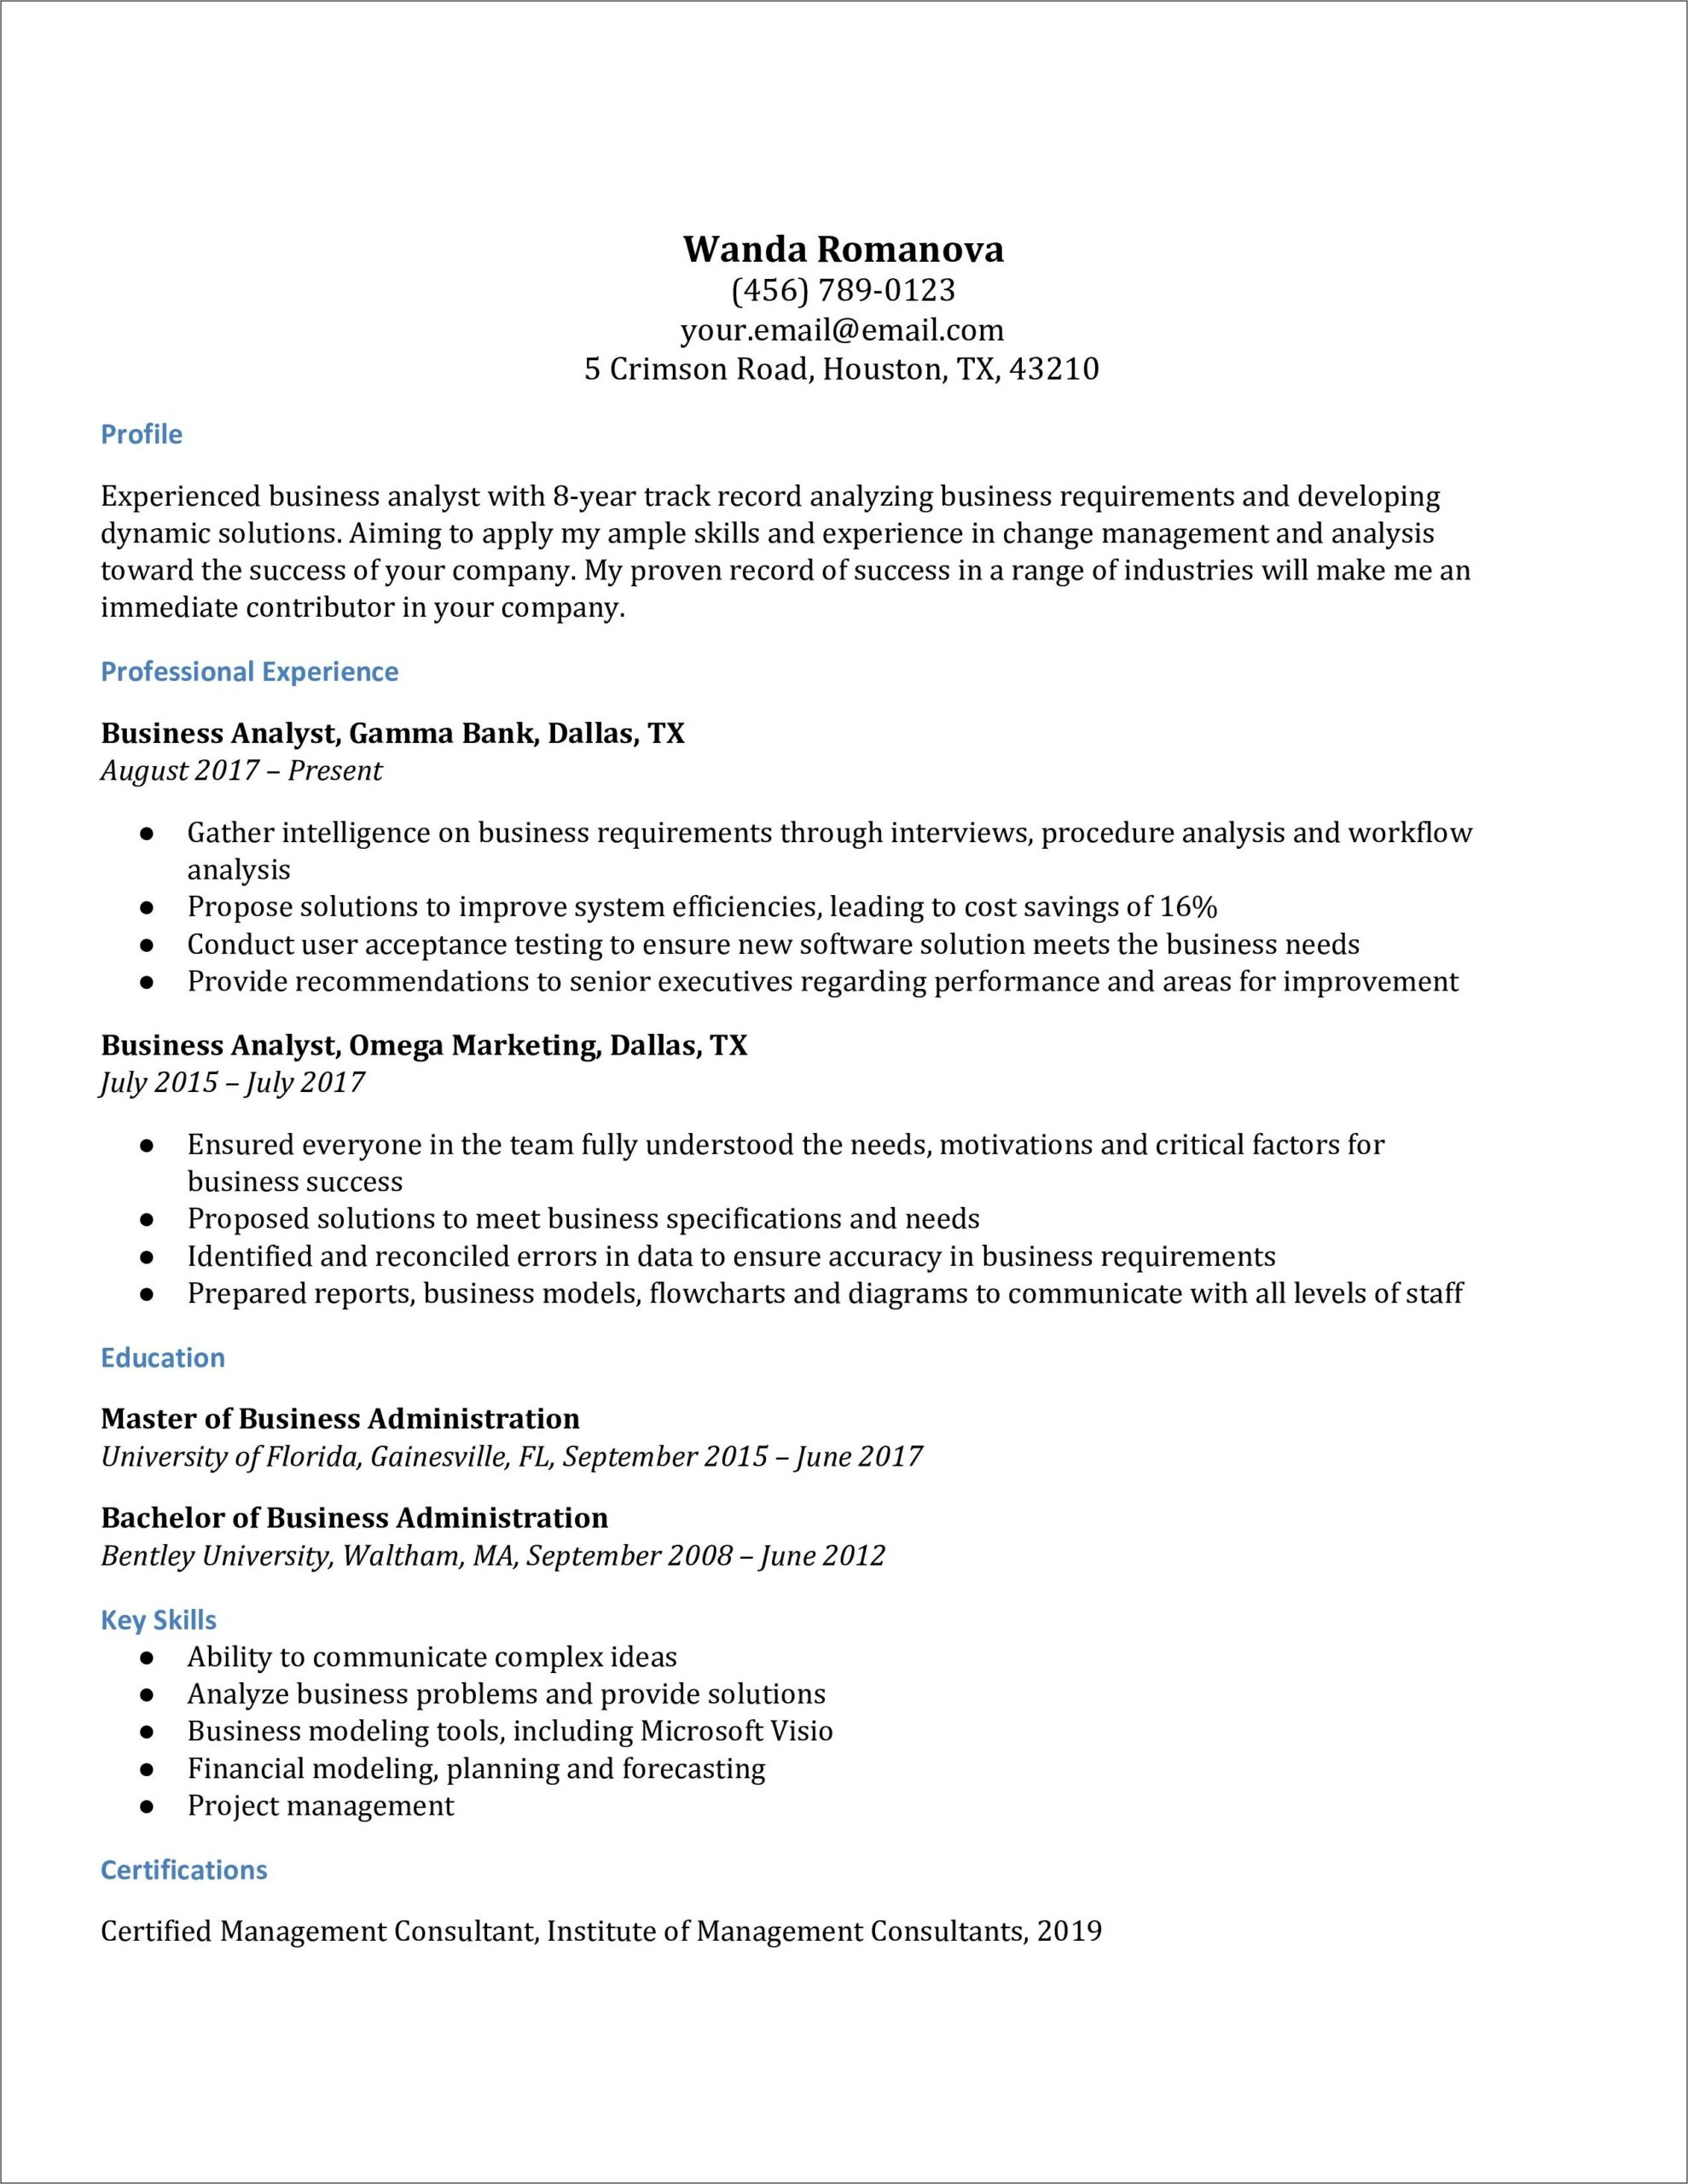 Conducted Indepth Analysis Resume Example